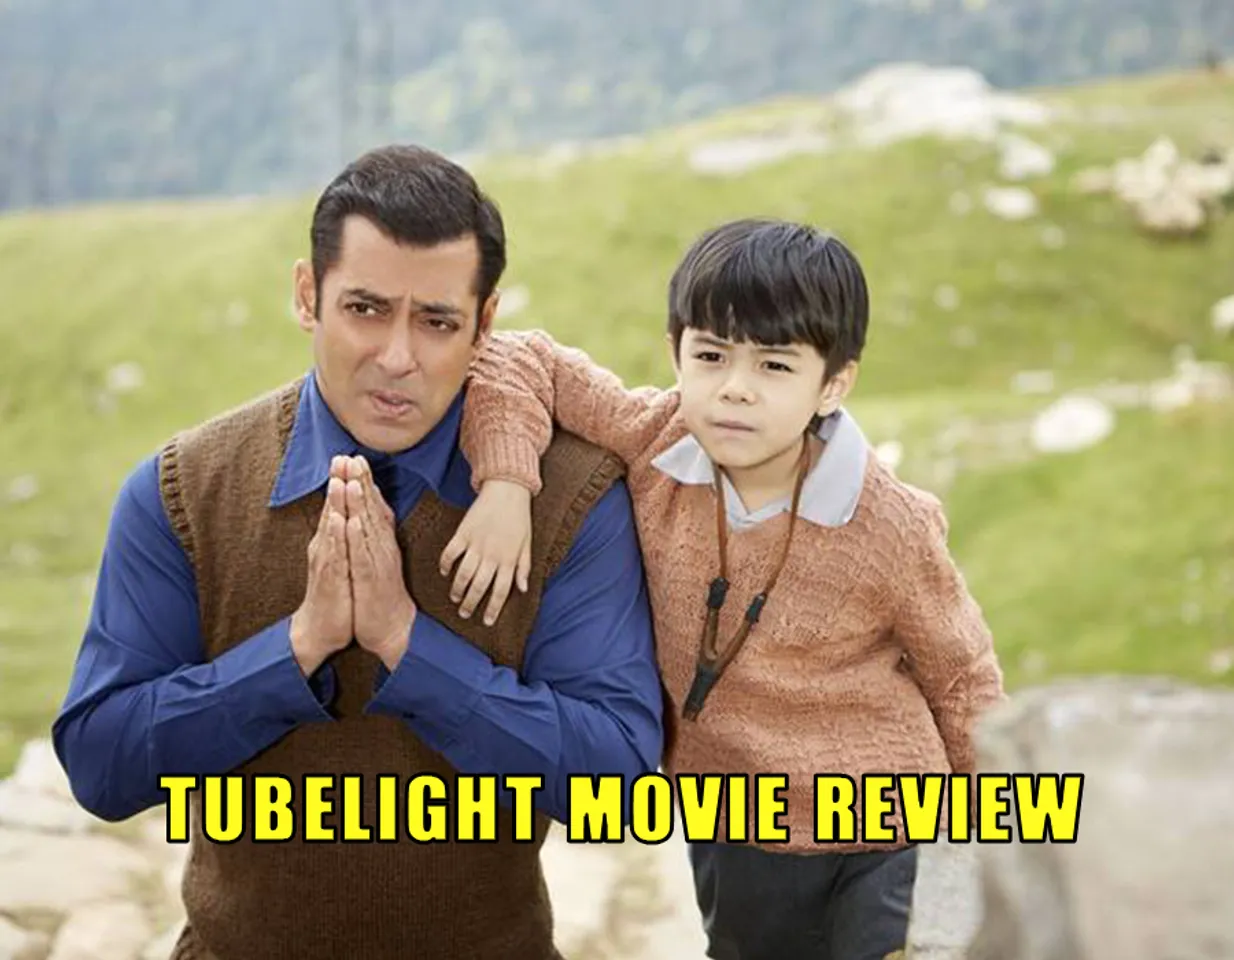 10 THINGS WE LOVE ABOUT TUBELIGHT